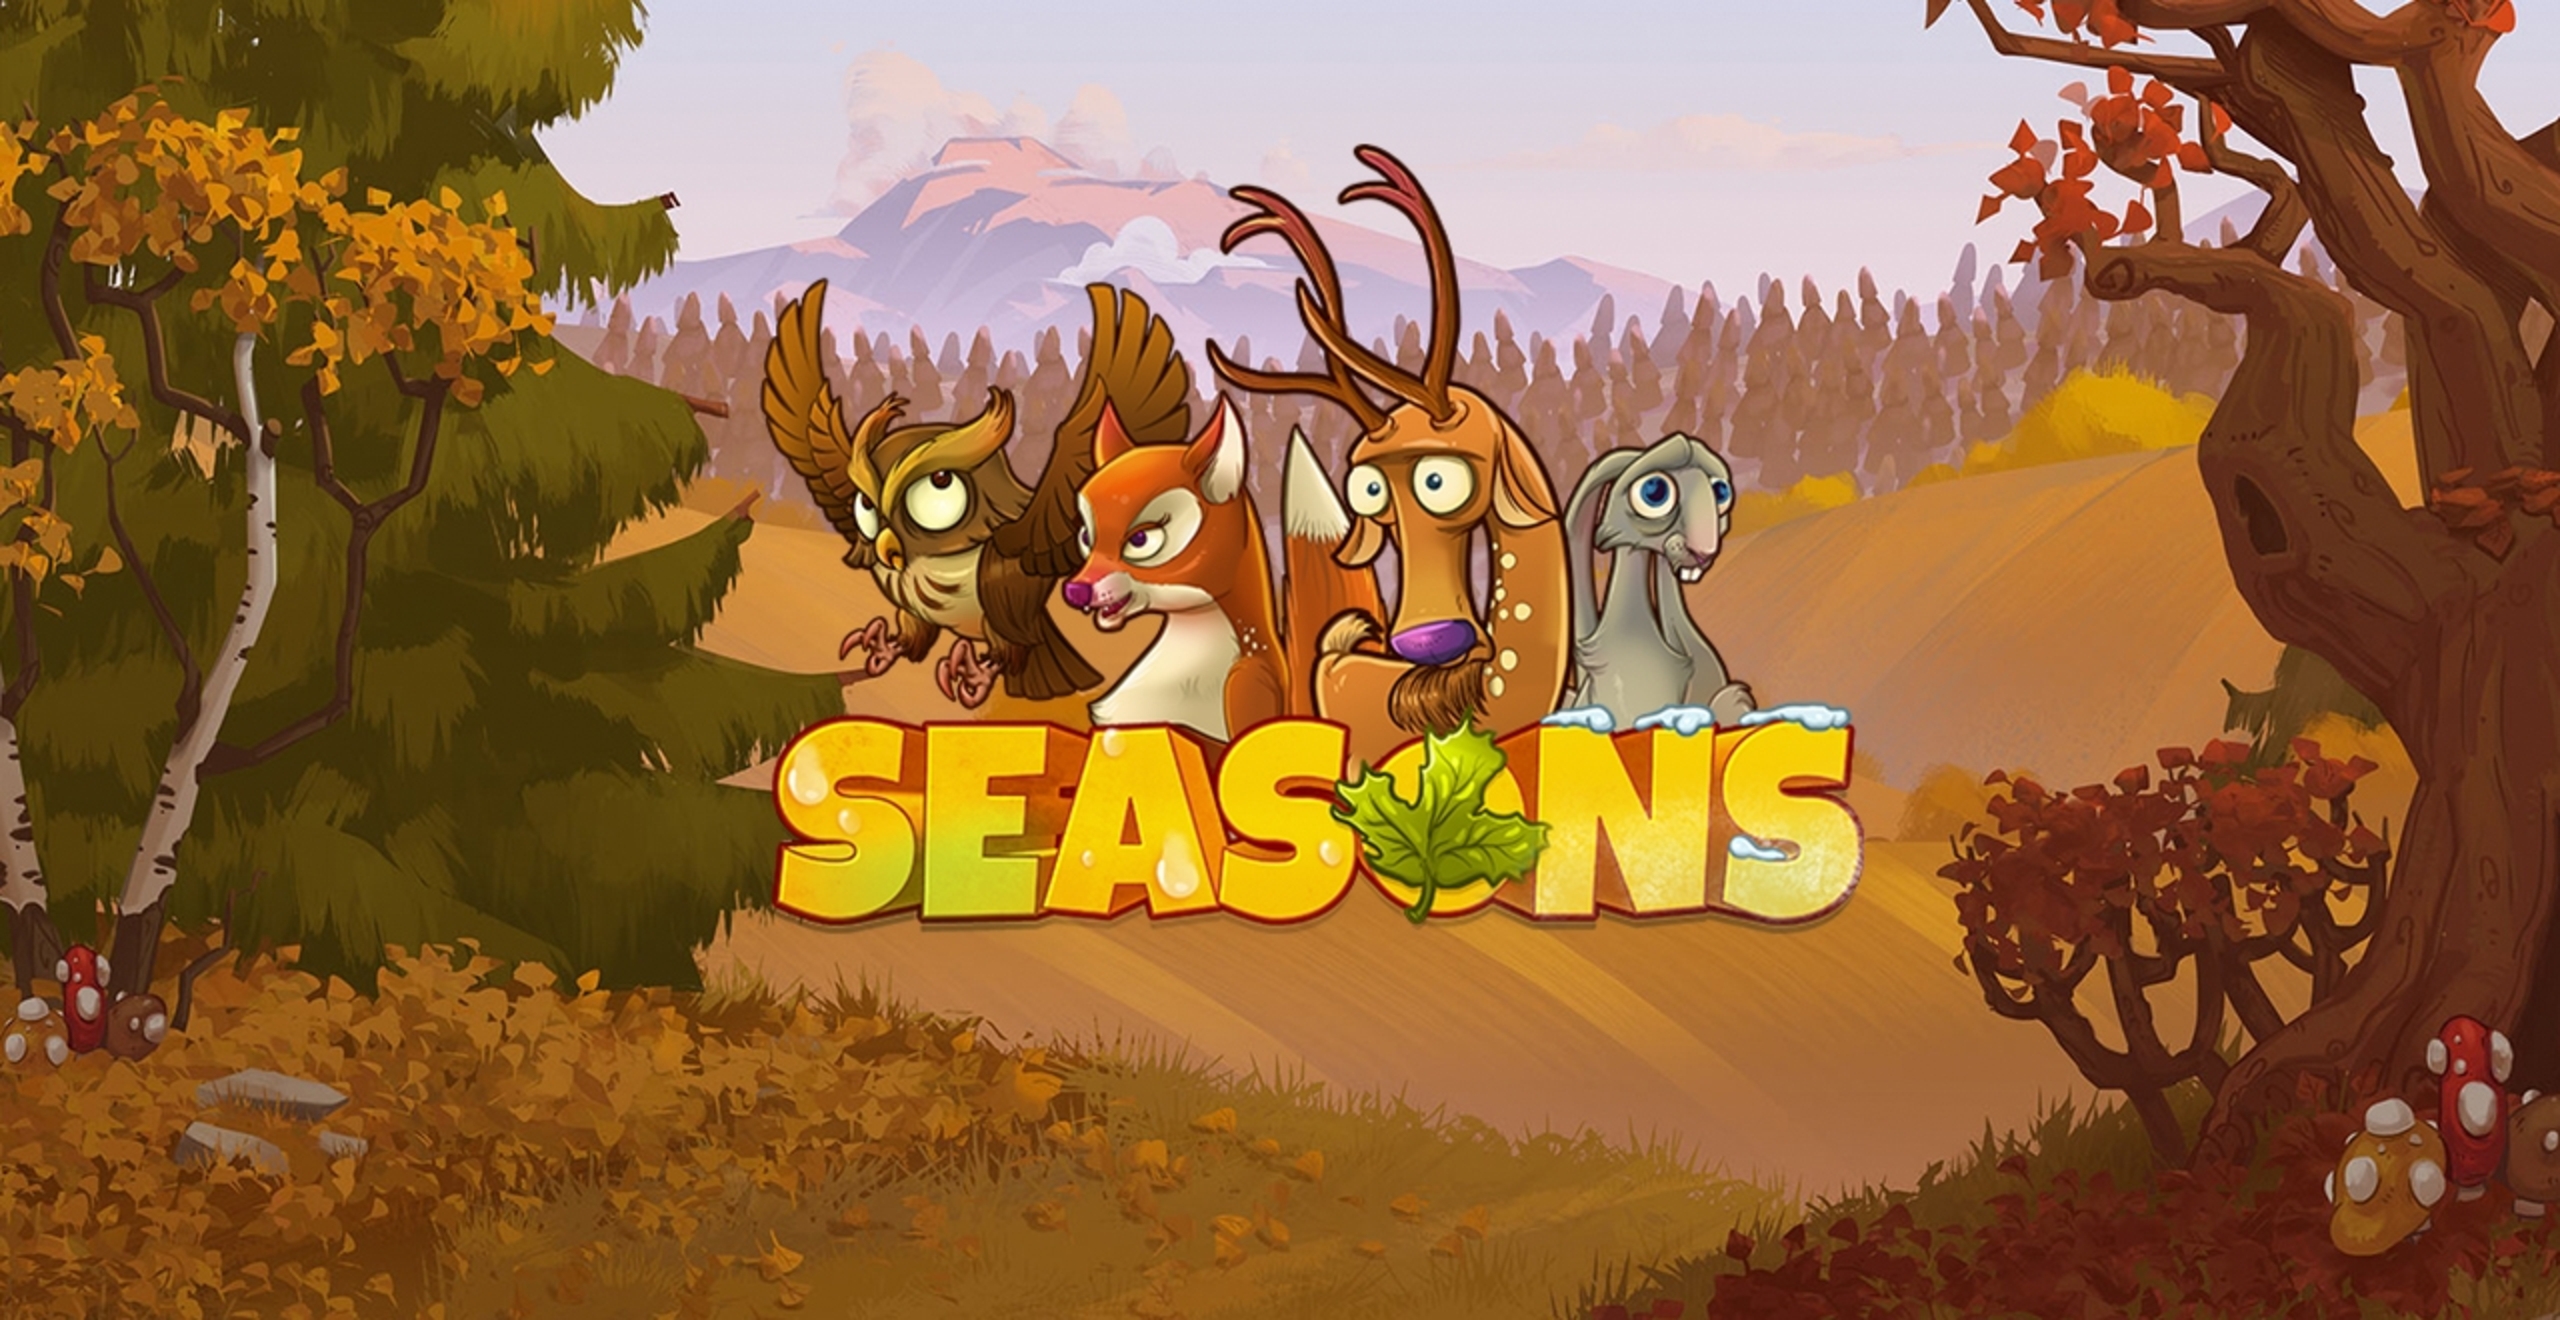 The Seasons Online Slot Demo Game by Yggdrasil Gaming